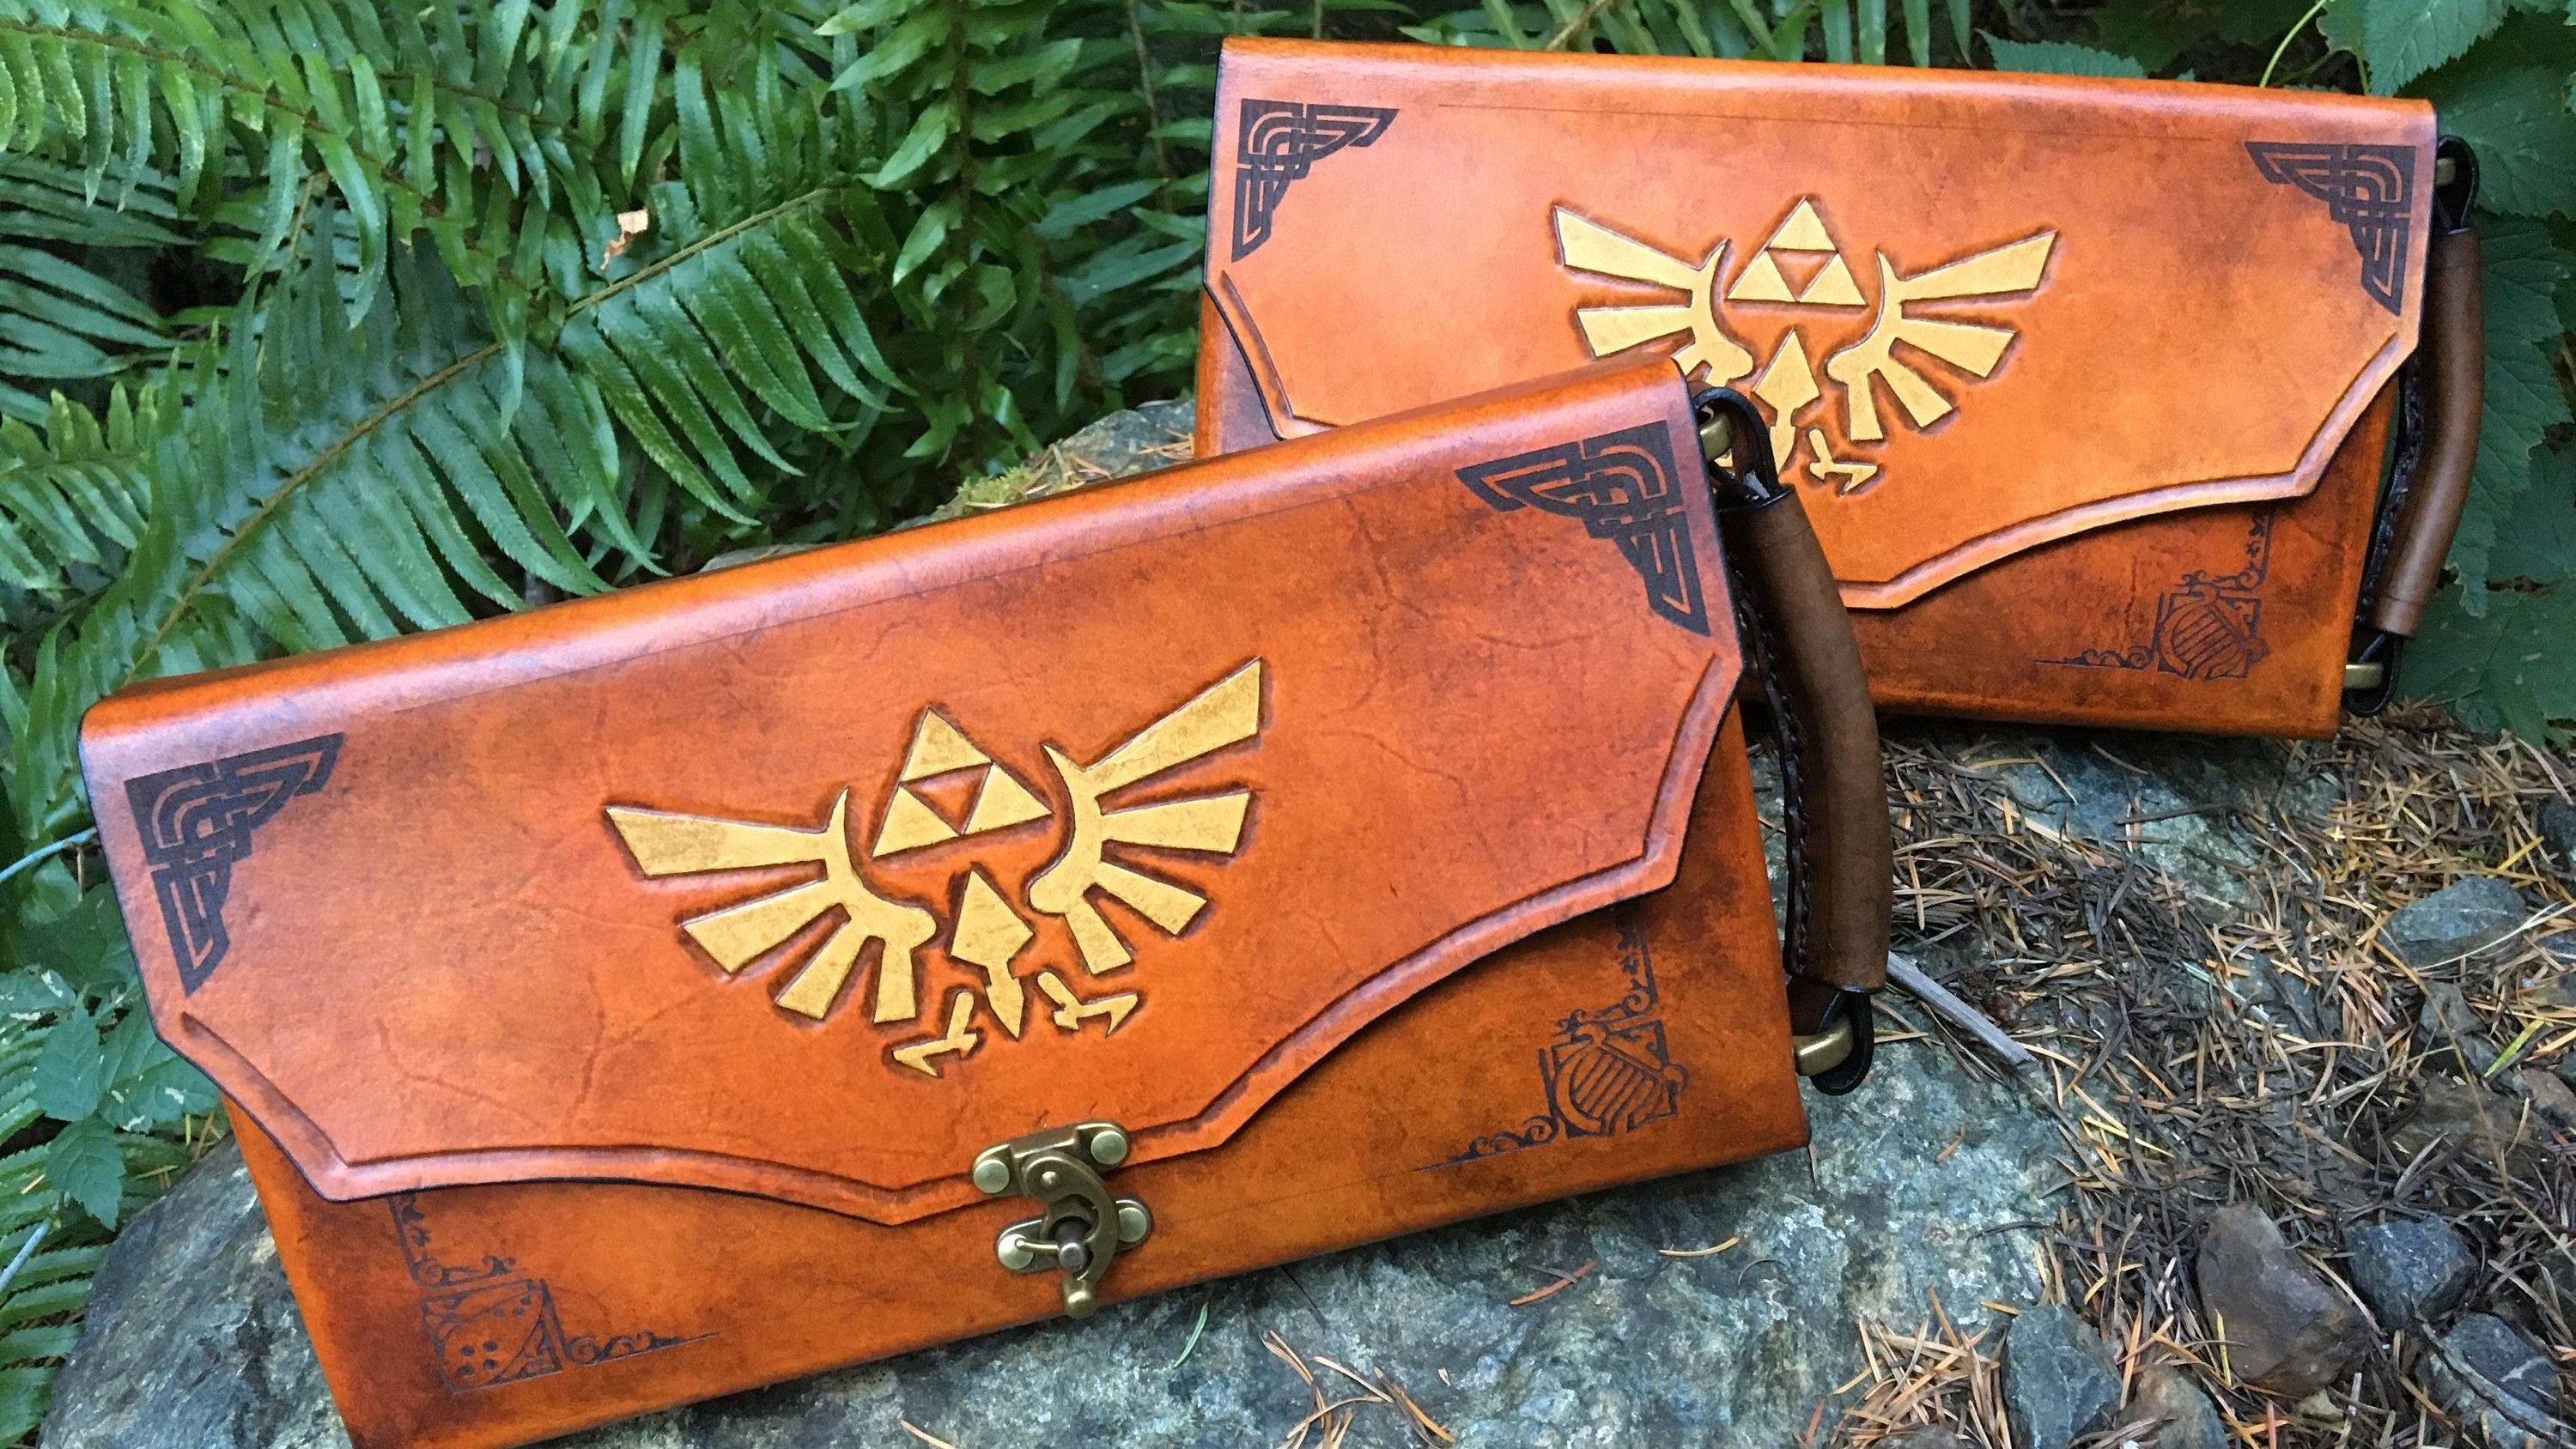 The Legend of Zelda Breath of the Wild Leather Bound Leatherbound Nintendo Switch Case Holder Bag Feature